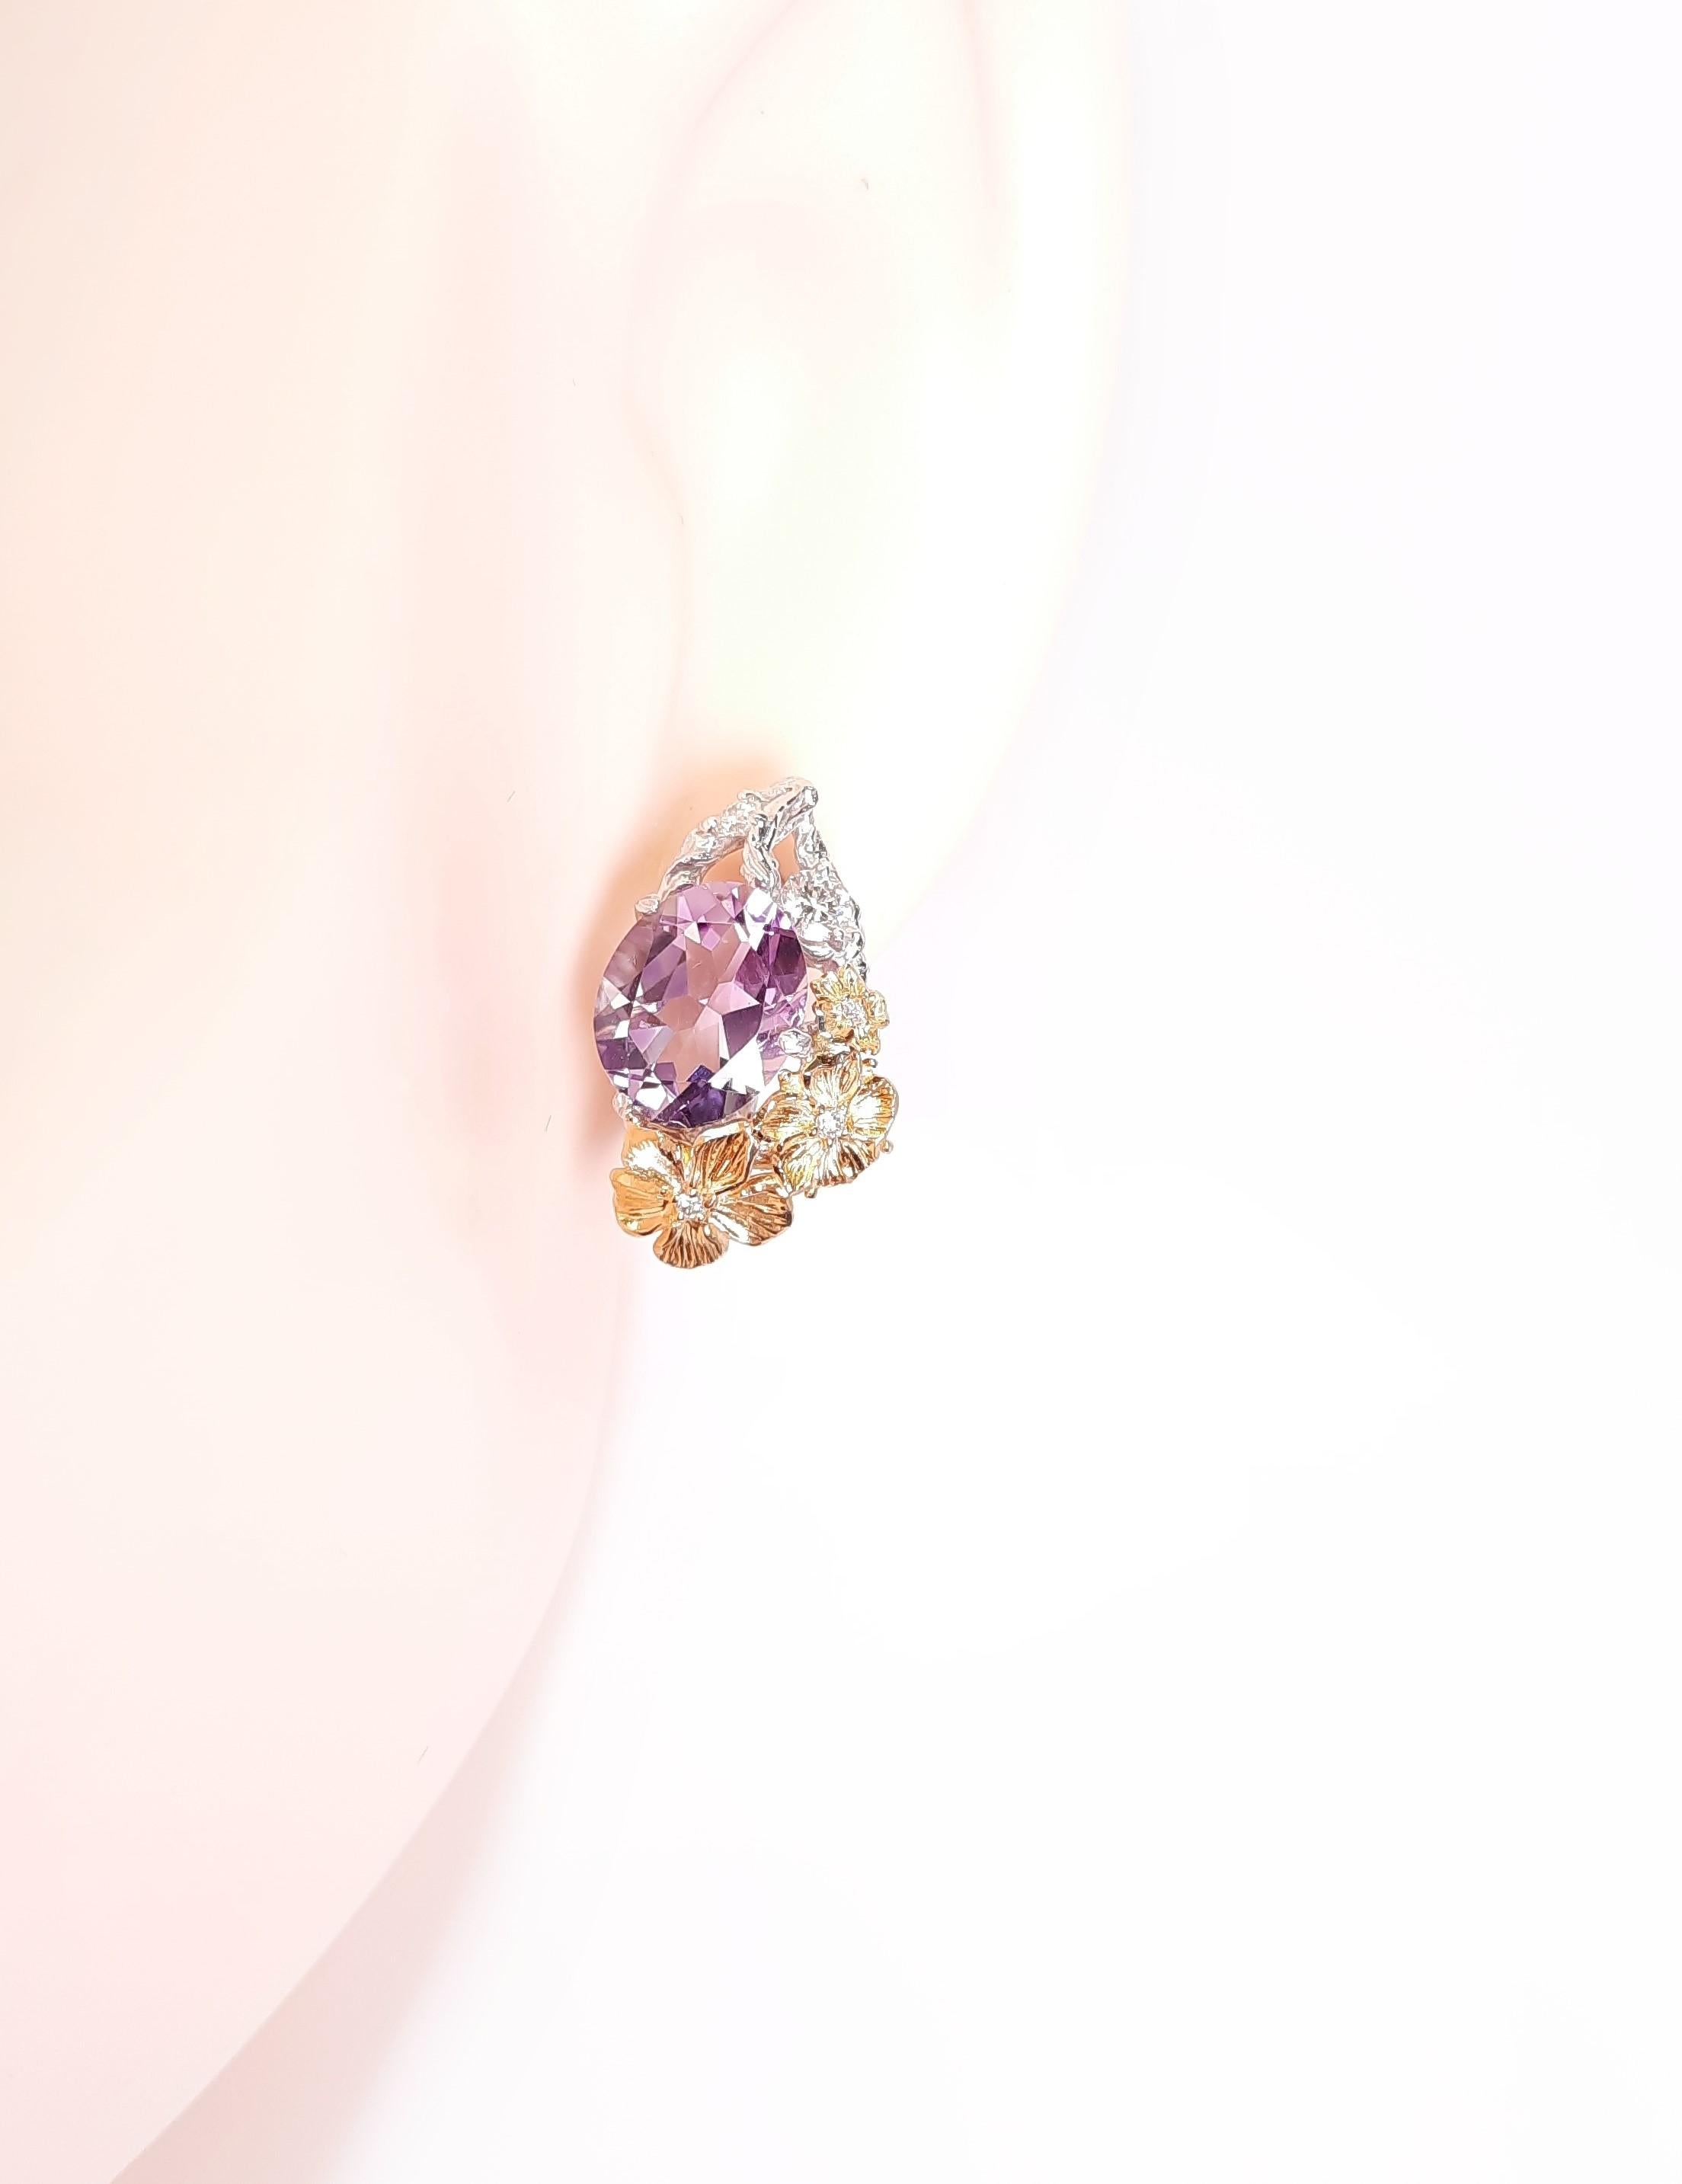 18 Karat Gold Amethyst Diamond Floral Earrings In Excellent Condition For Sale In Hong Kong, HK